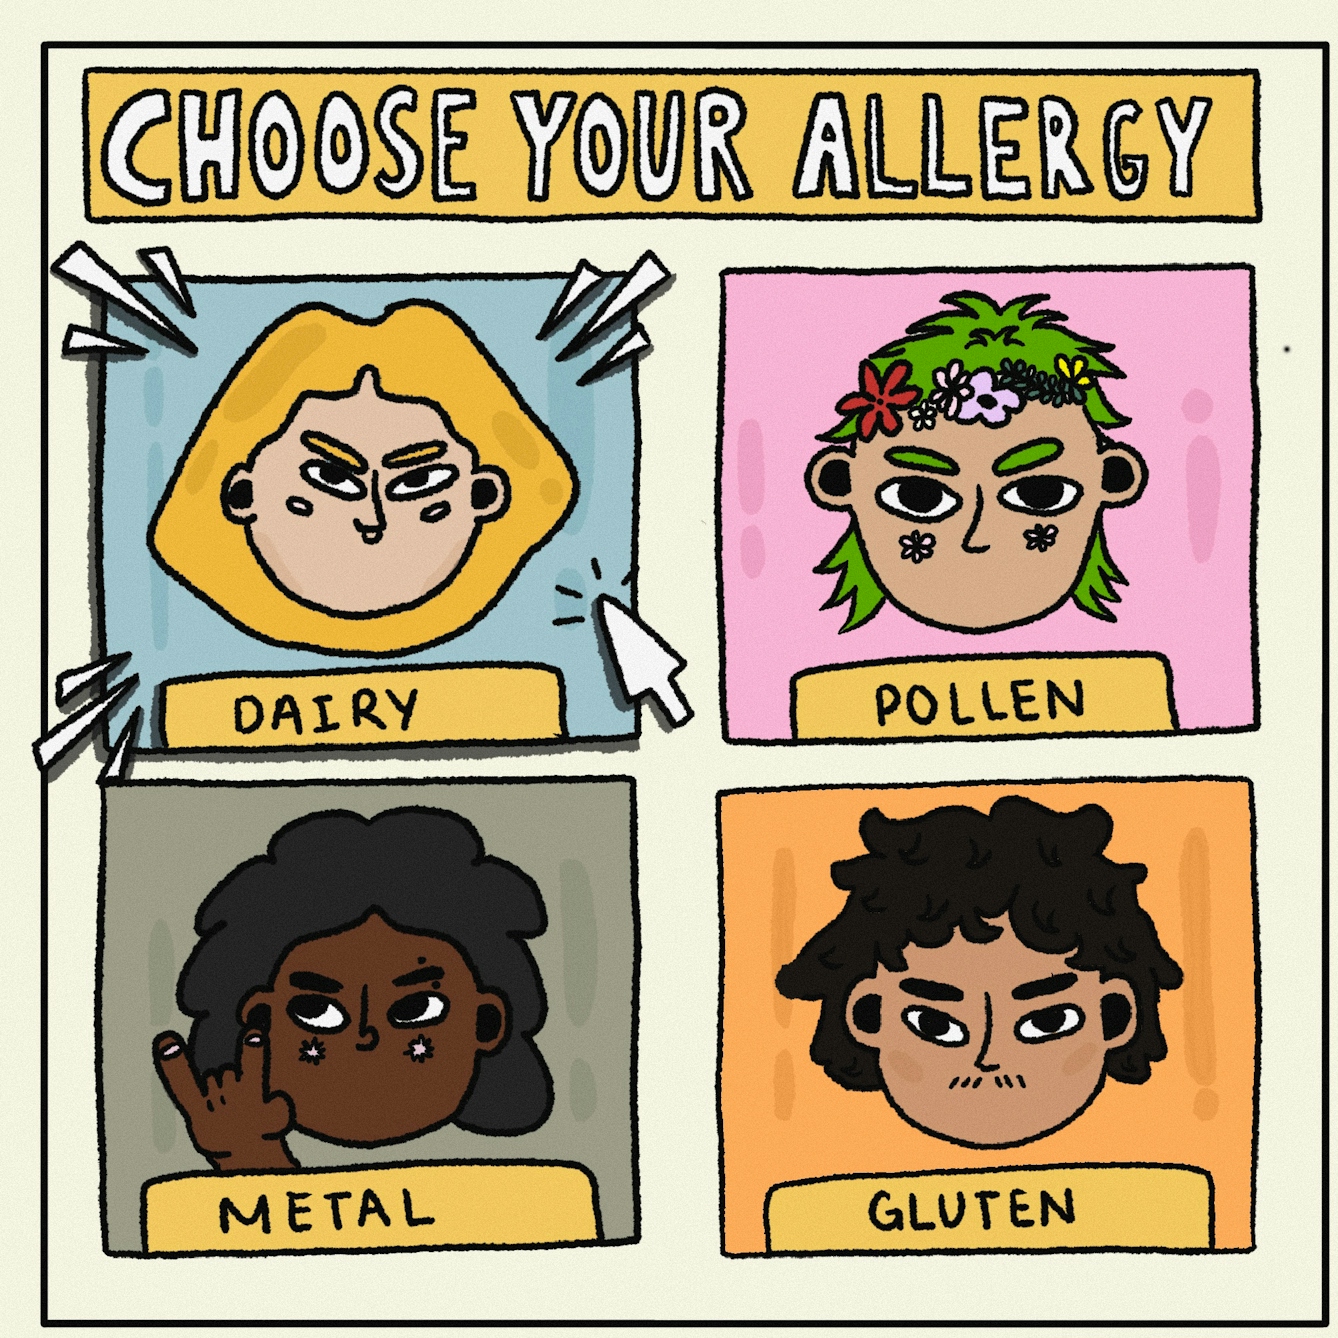 Panel 1 of a digitally drawn, four-panel comic titled ‘Down the Toilet’. You are playing a video game and are being asked to “CHOOSE YOUR ALLERGY”. A box in the top left reads ‘DAIRY’ and has a character with light brown skin and yellow hair. A cartoon cursor is clicking over this box to signal this is the allergy you have chosen. There are three other boxes with characters that have not been chosen, labelled ‘POLLEN’, ‘METAL’ and ‘GLUTEN’.